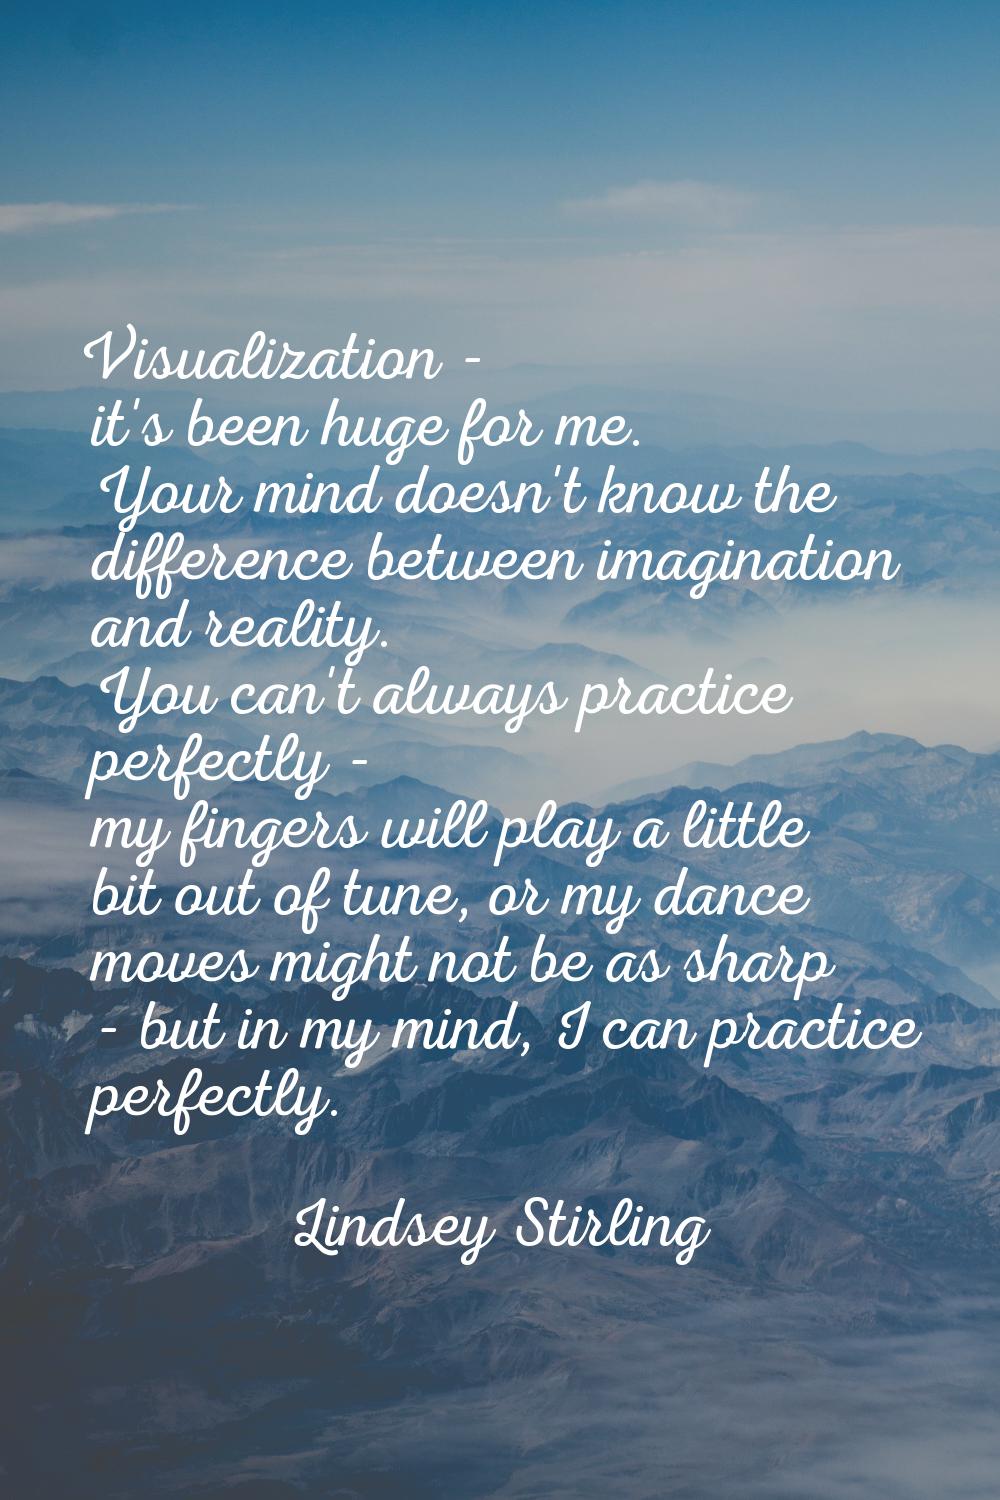 Visualization - it's been huge for me. Your mind doesn't know the difference between imagination an